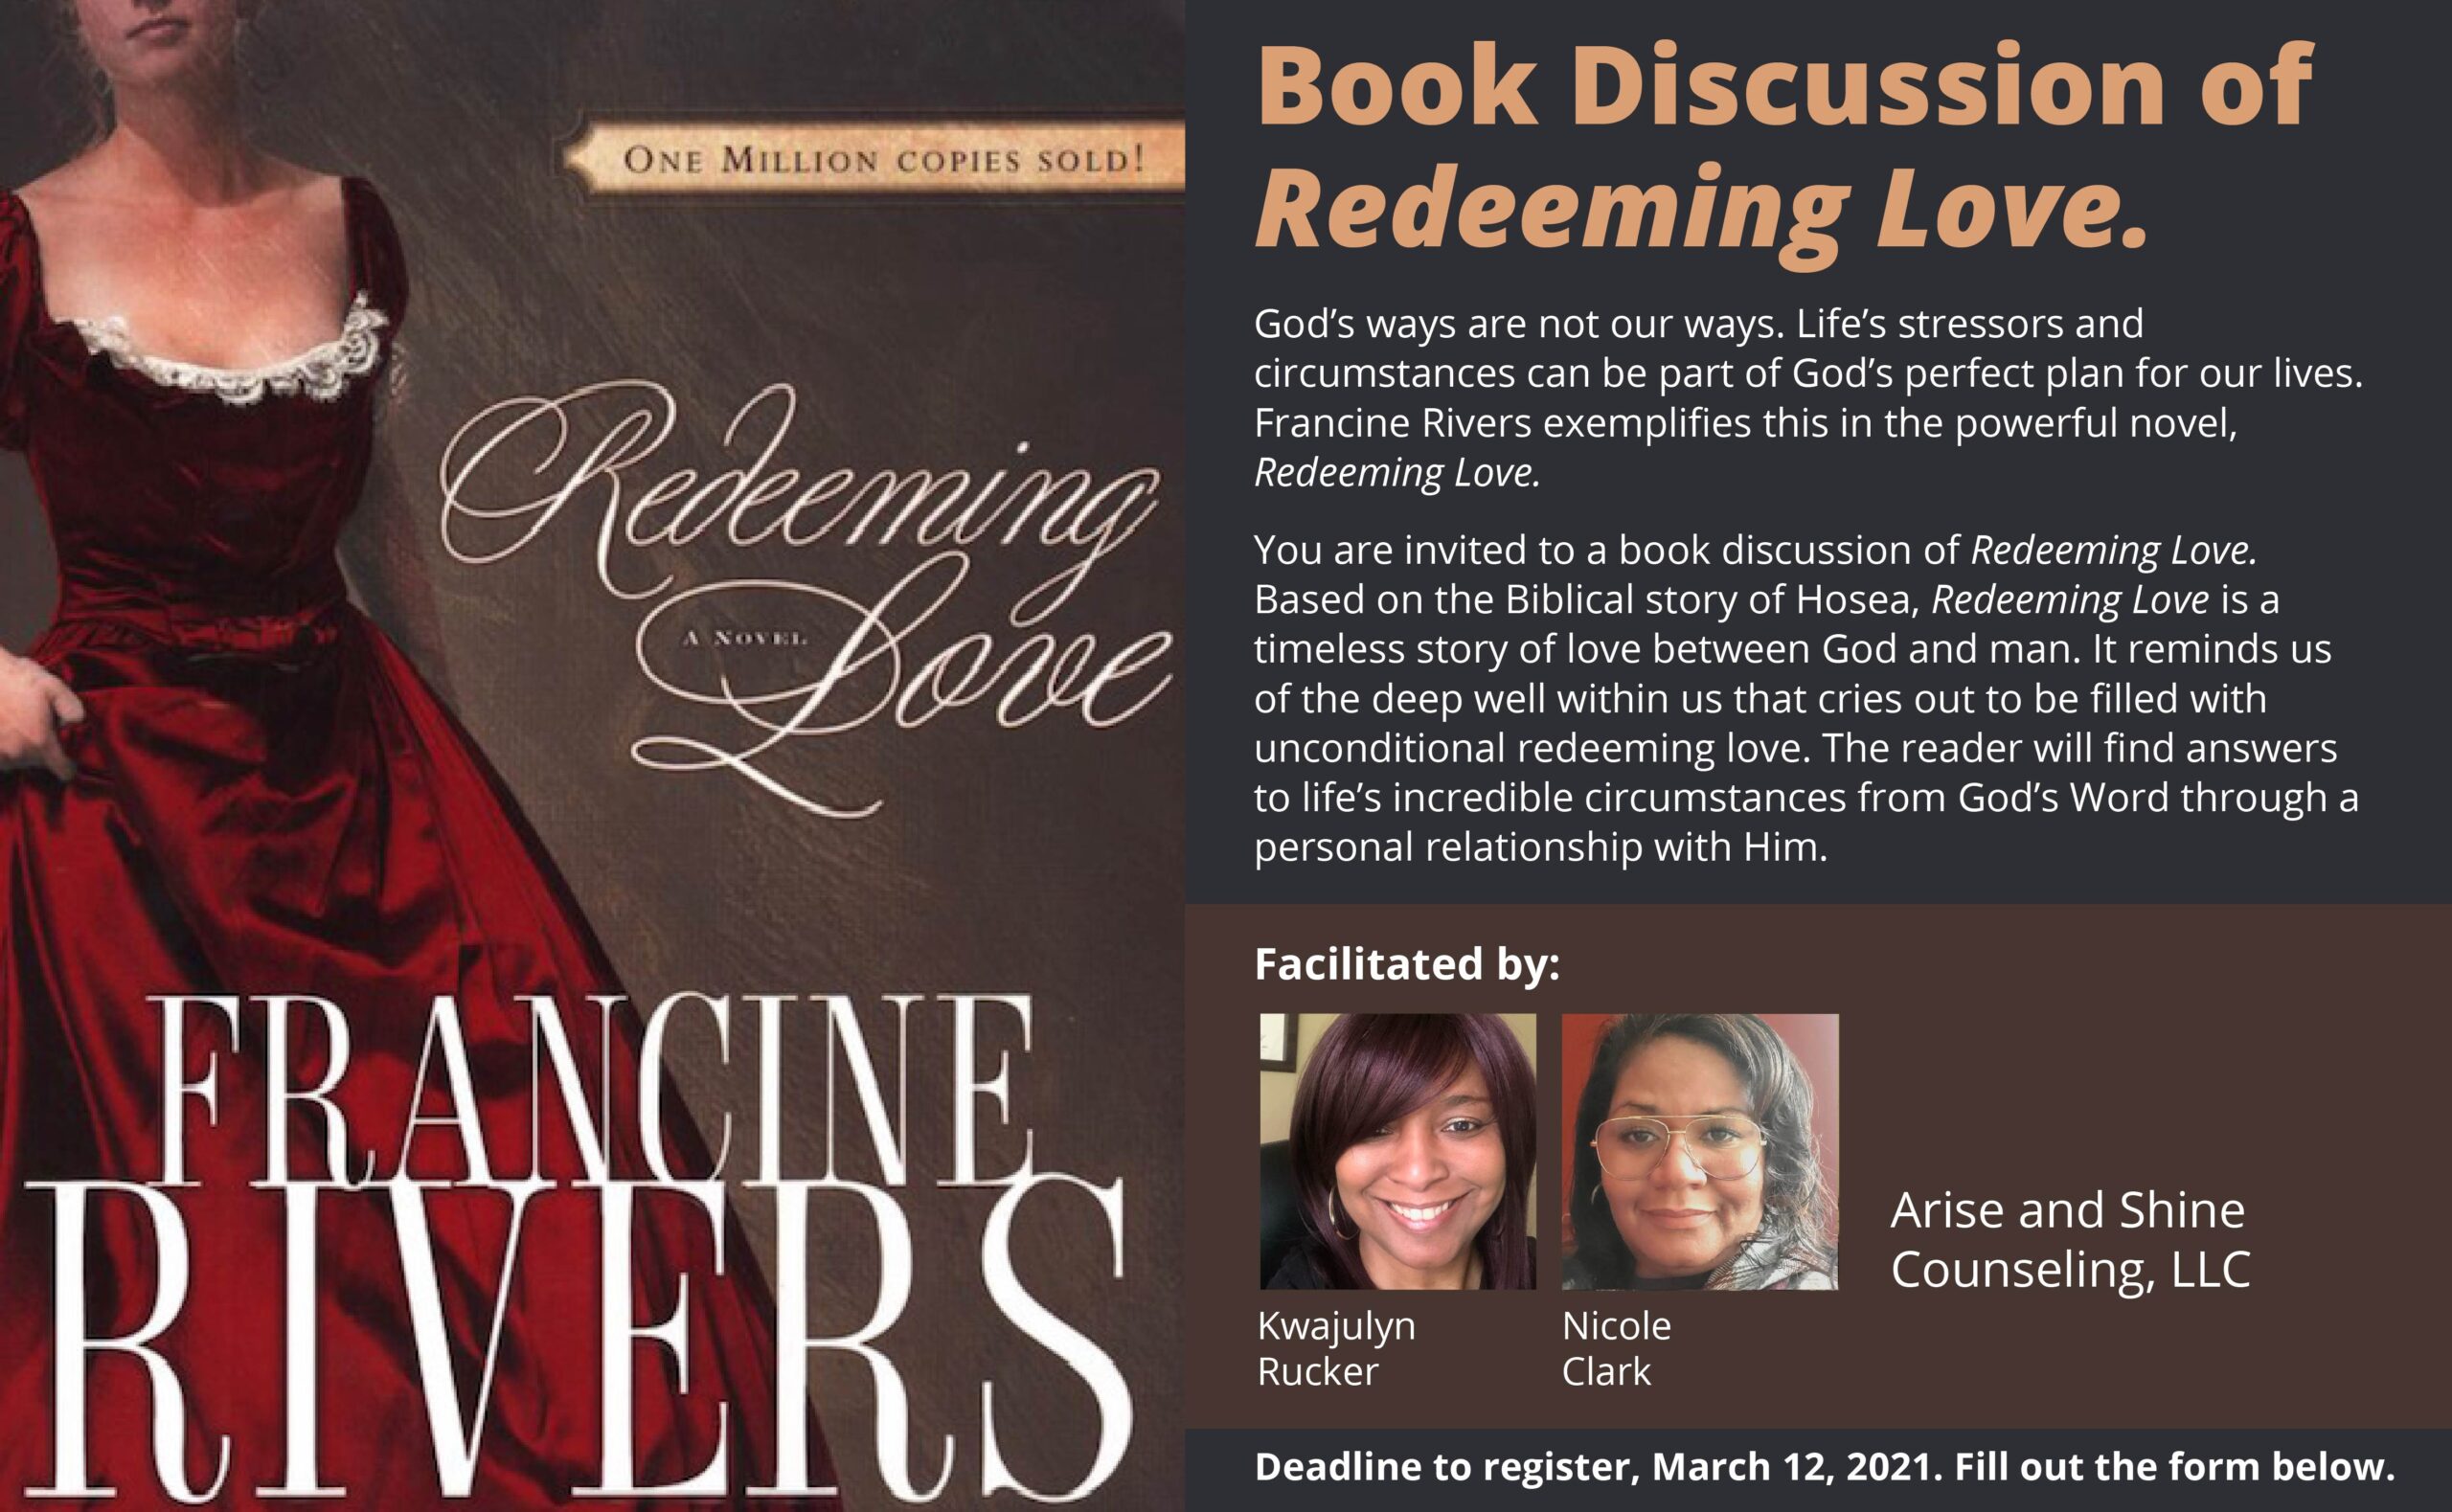 Zoom Book Discussion on Redeeming Love